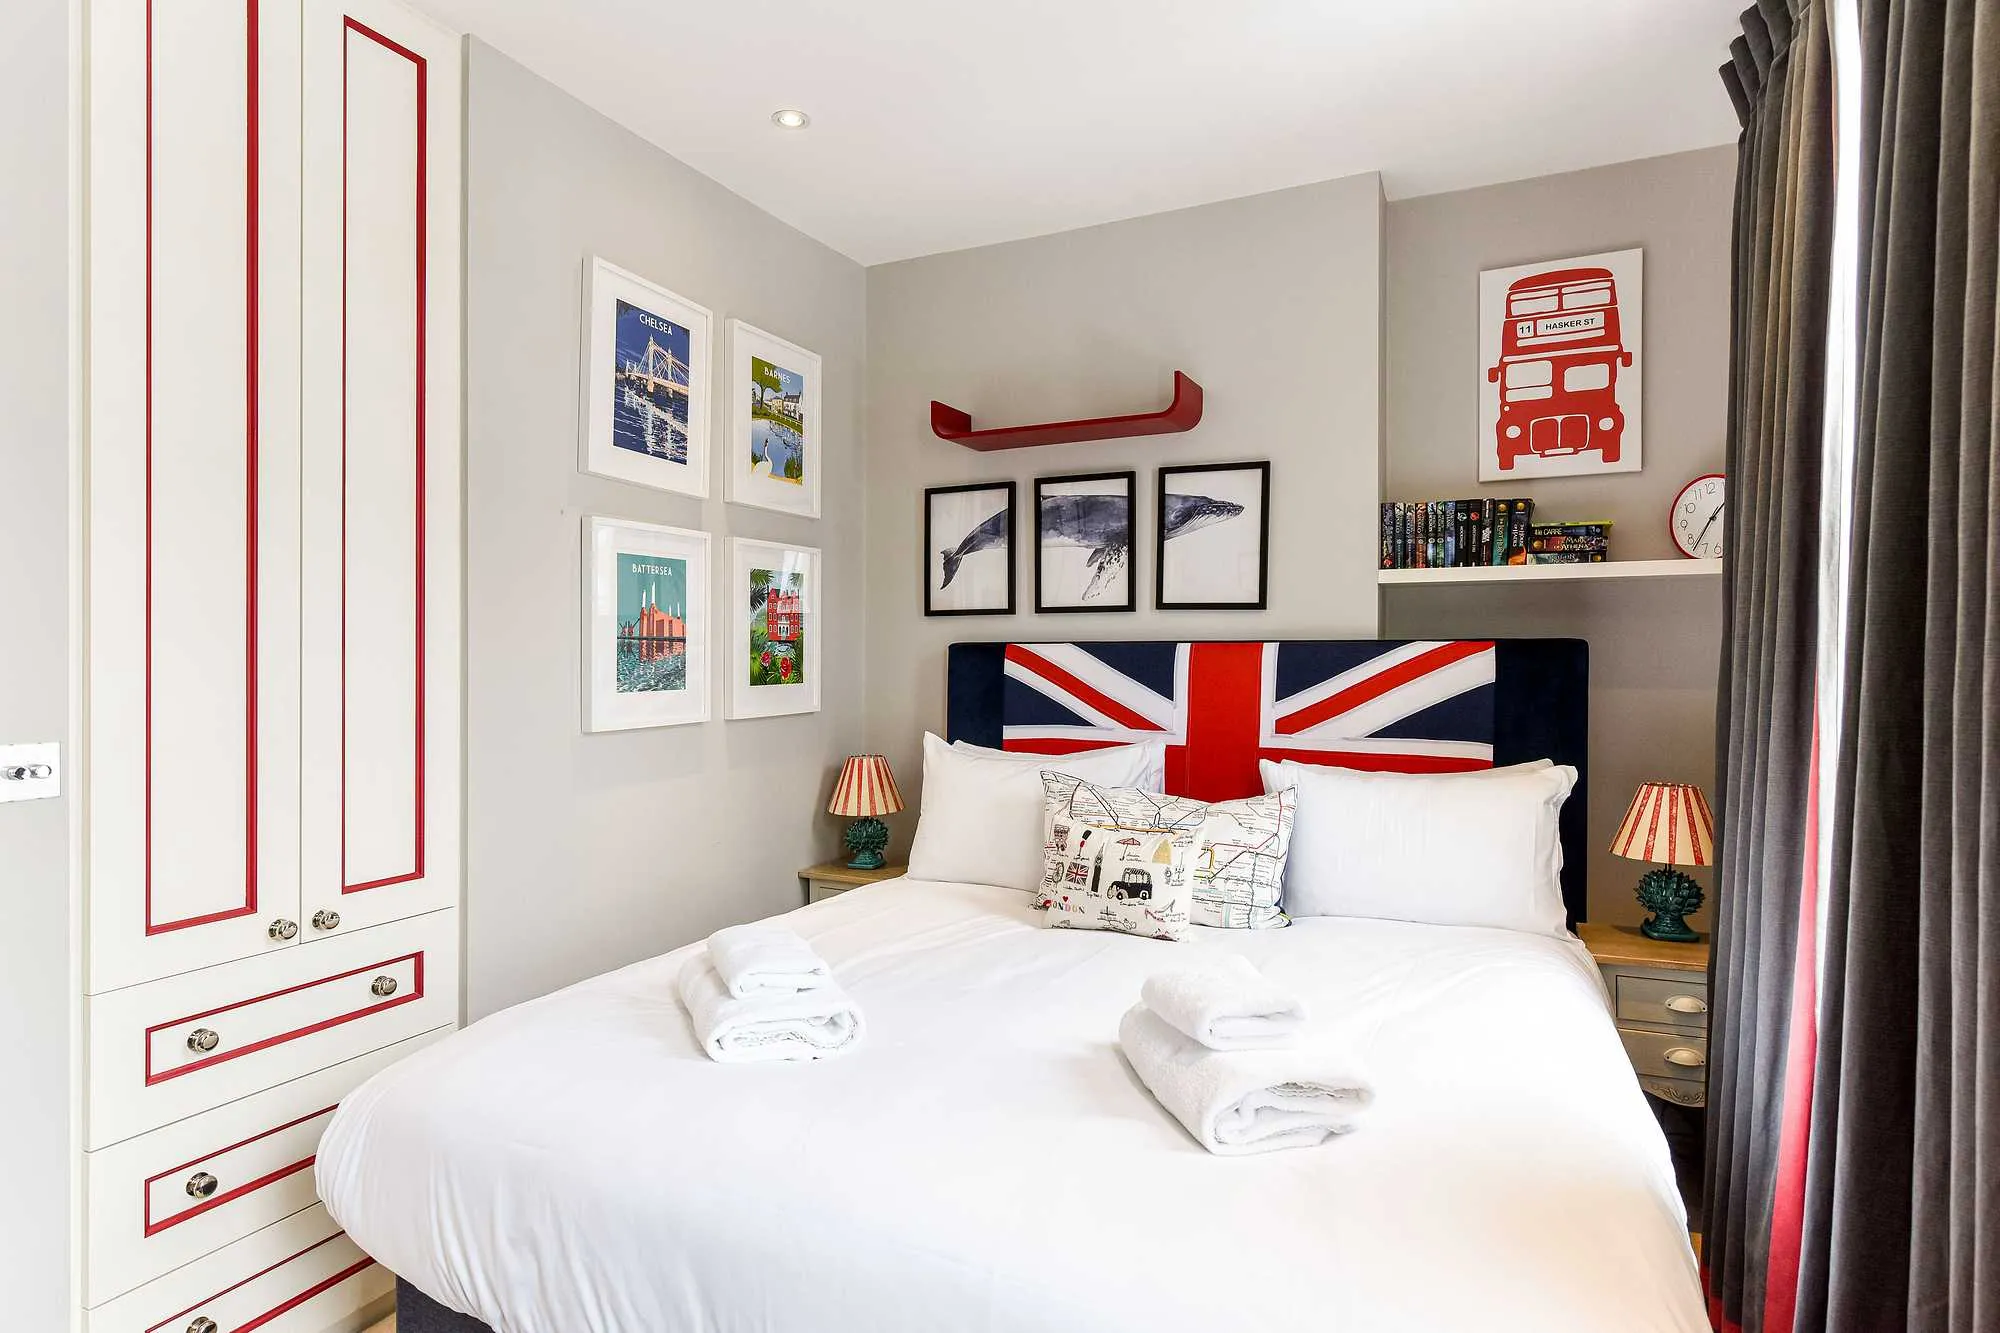 Hasker Street, holiday home in Chelsea, London